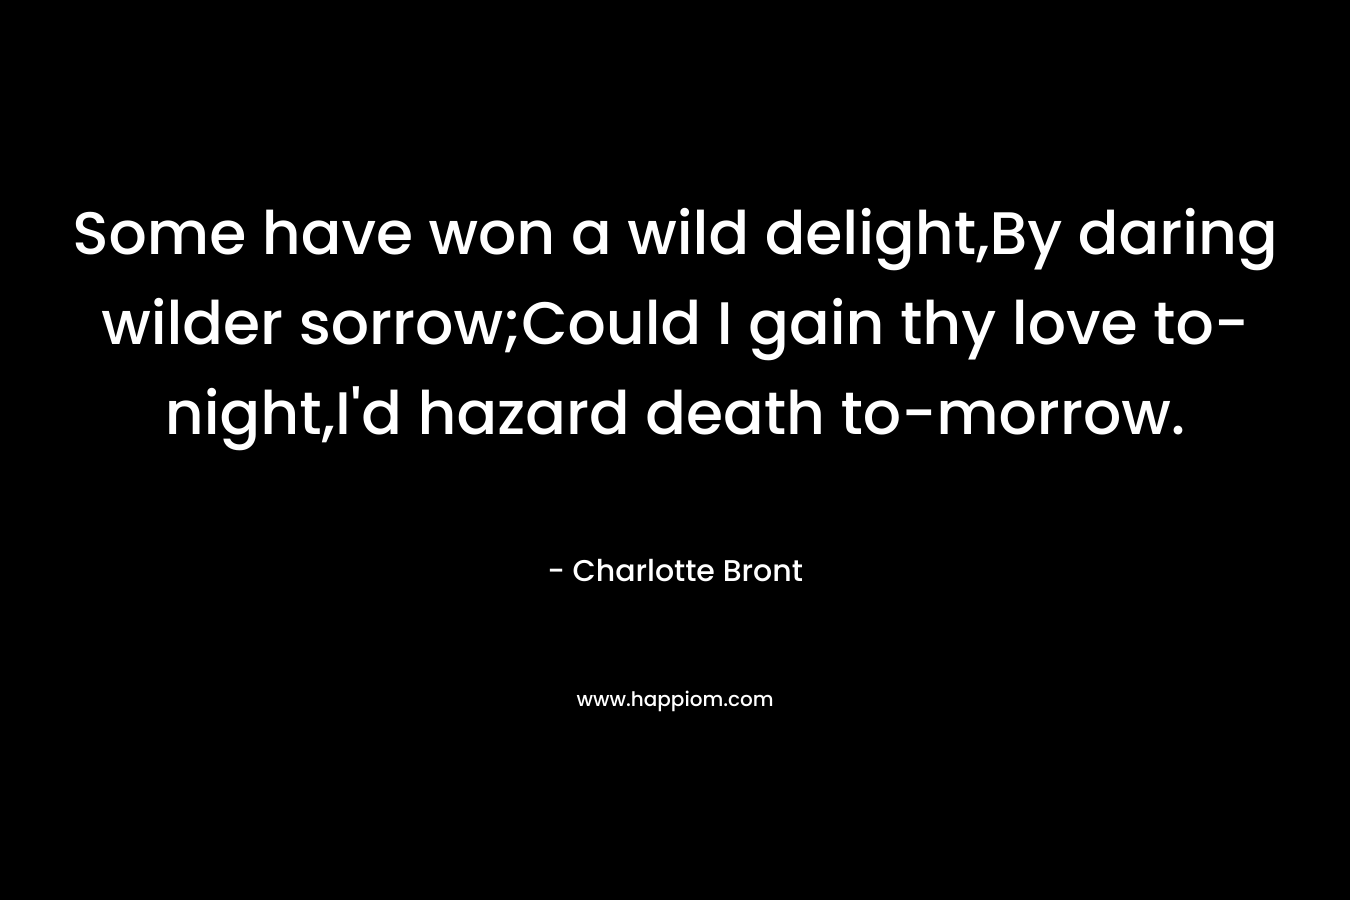 Some have won a wild delight,By daring wilder sorrow;Could I gain thy love to-night,I’d hazard death to-morrow. – Charlotte Bront